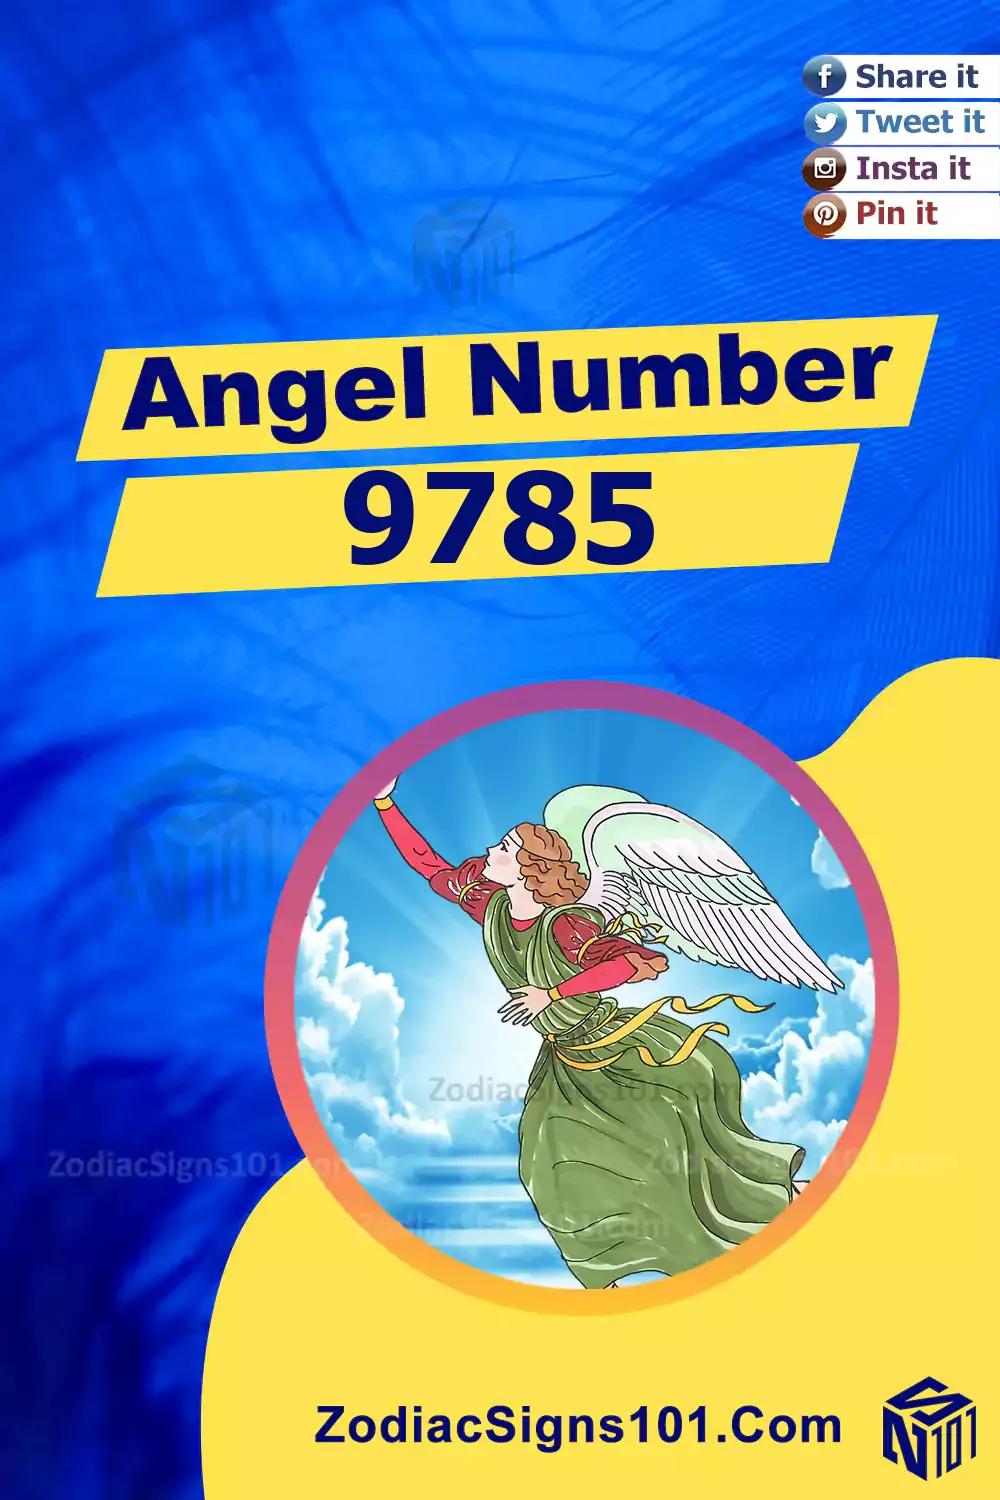 9785 Angel Number Meaning